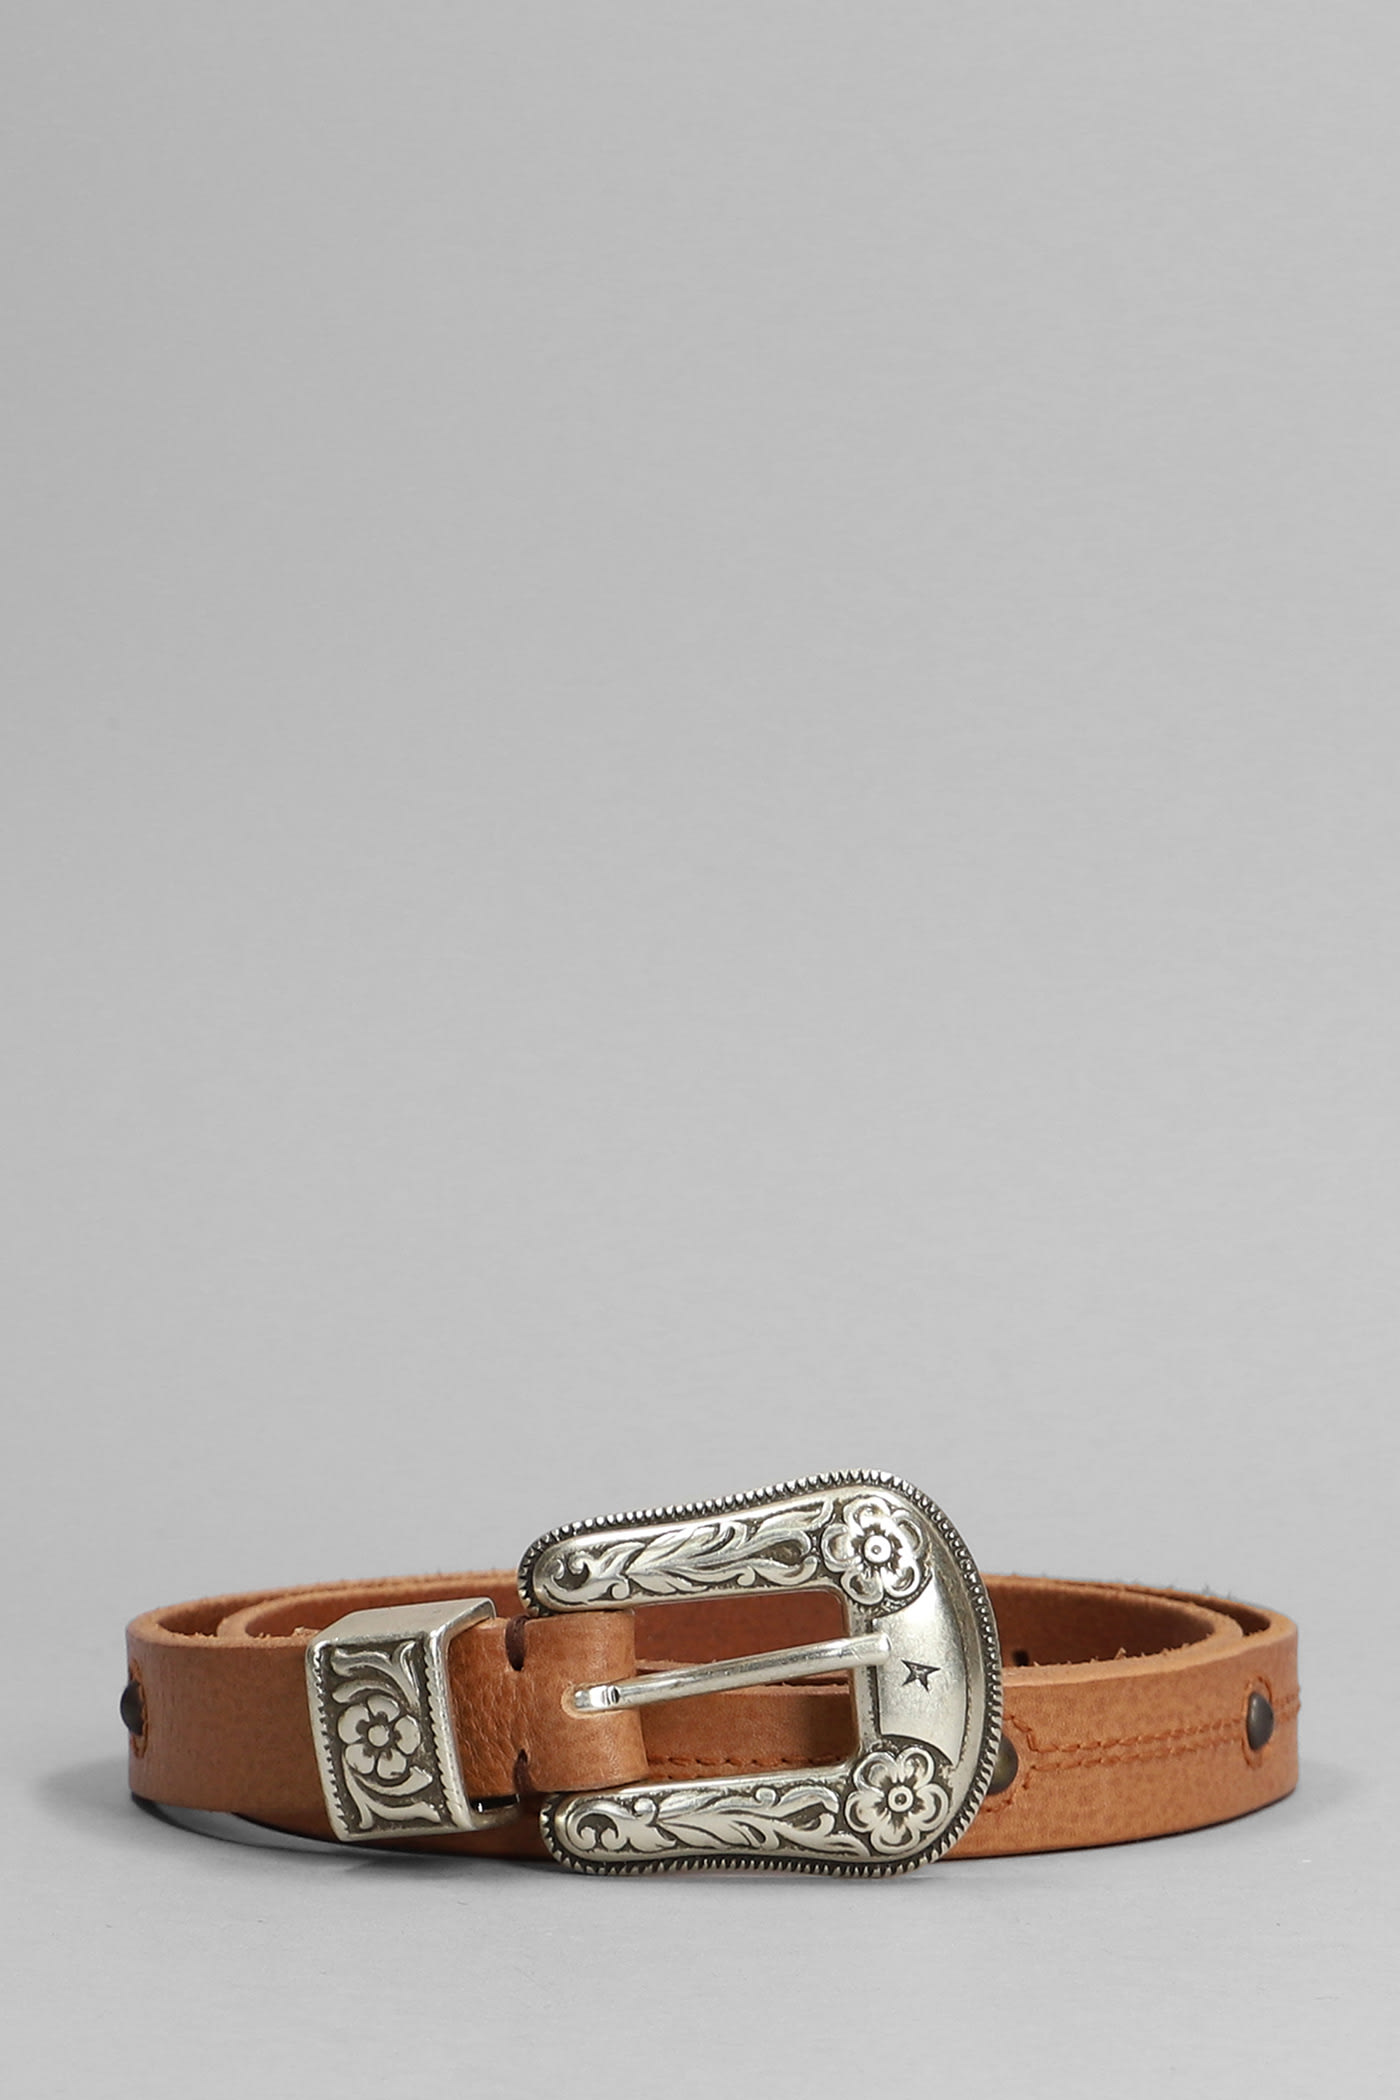 Golden Goose Belts In Leather Color Leather